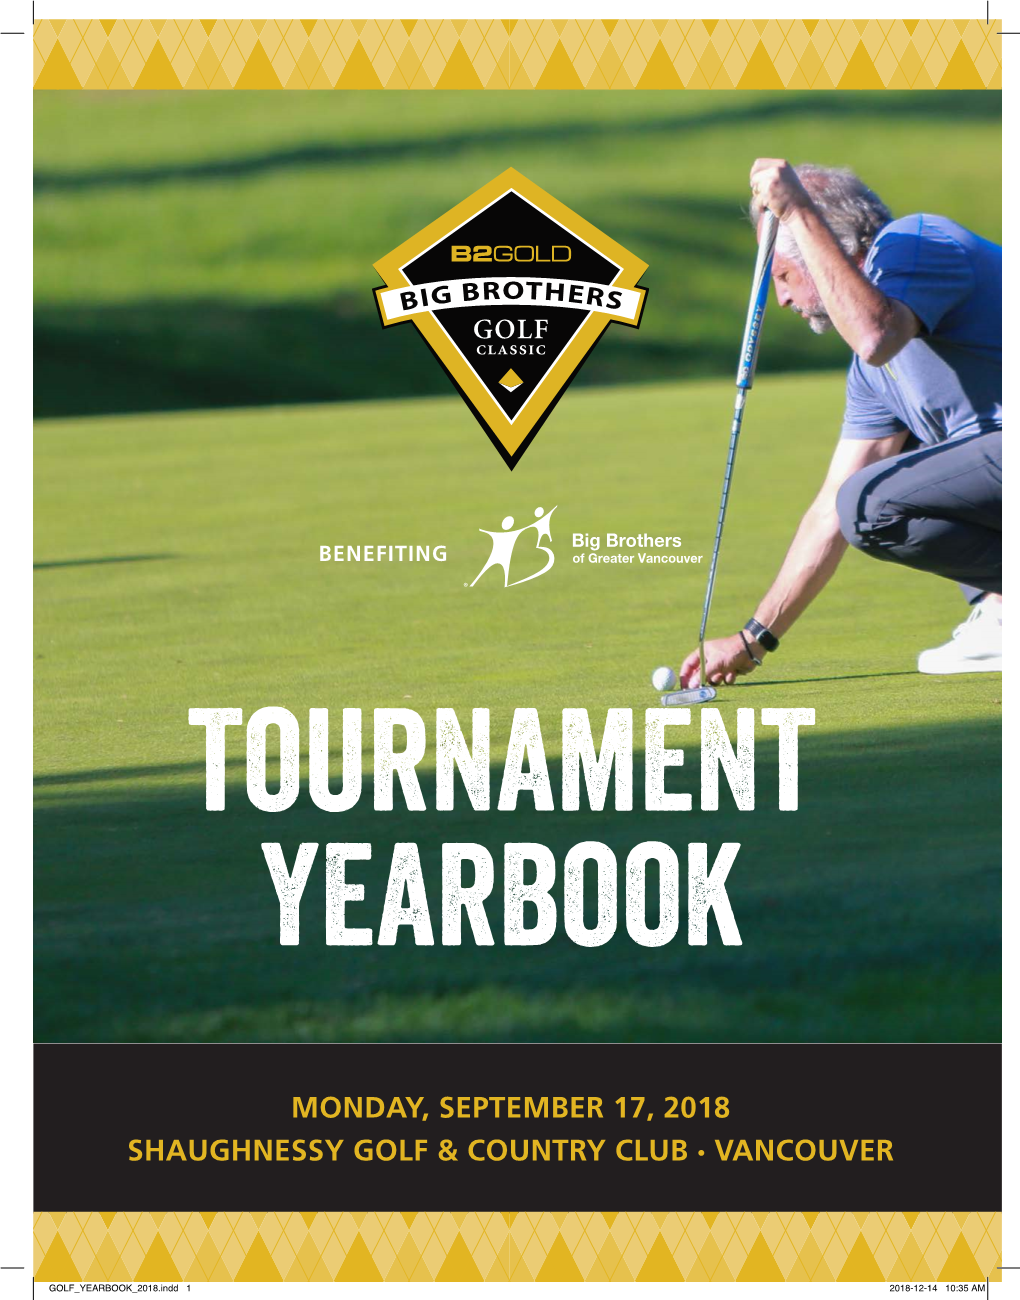 Monday, September 17, 2018 Shaughnessy Golf & Country Club • Vancouver